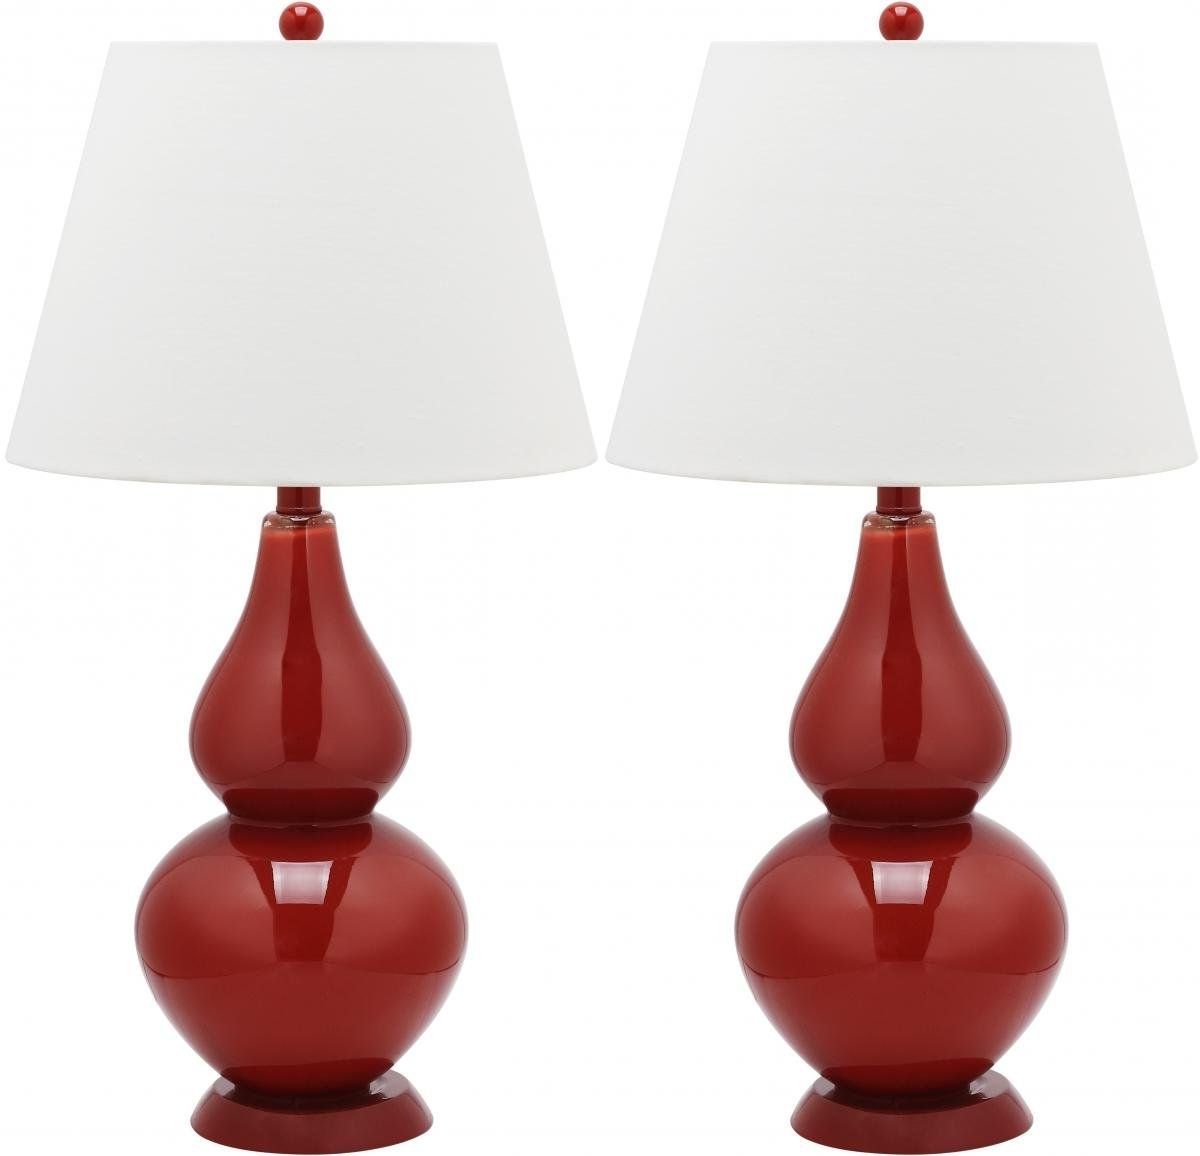 Best And Newest Vintage Red Table Lamp For Living Room Traditional Table Lamp With Pertaining To Red Living Room Table Lamps (View 15 of 15)